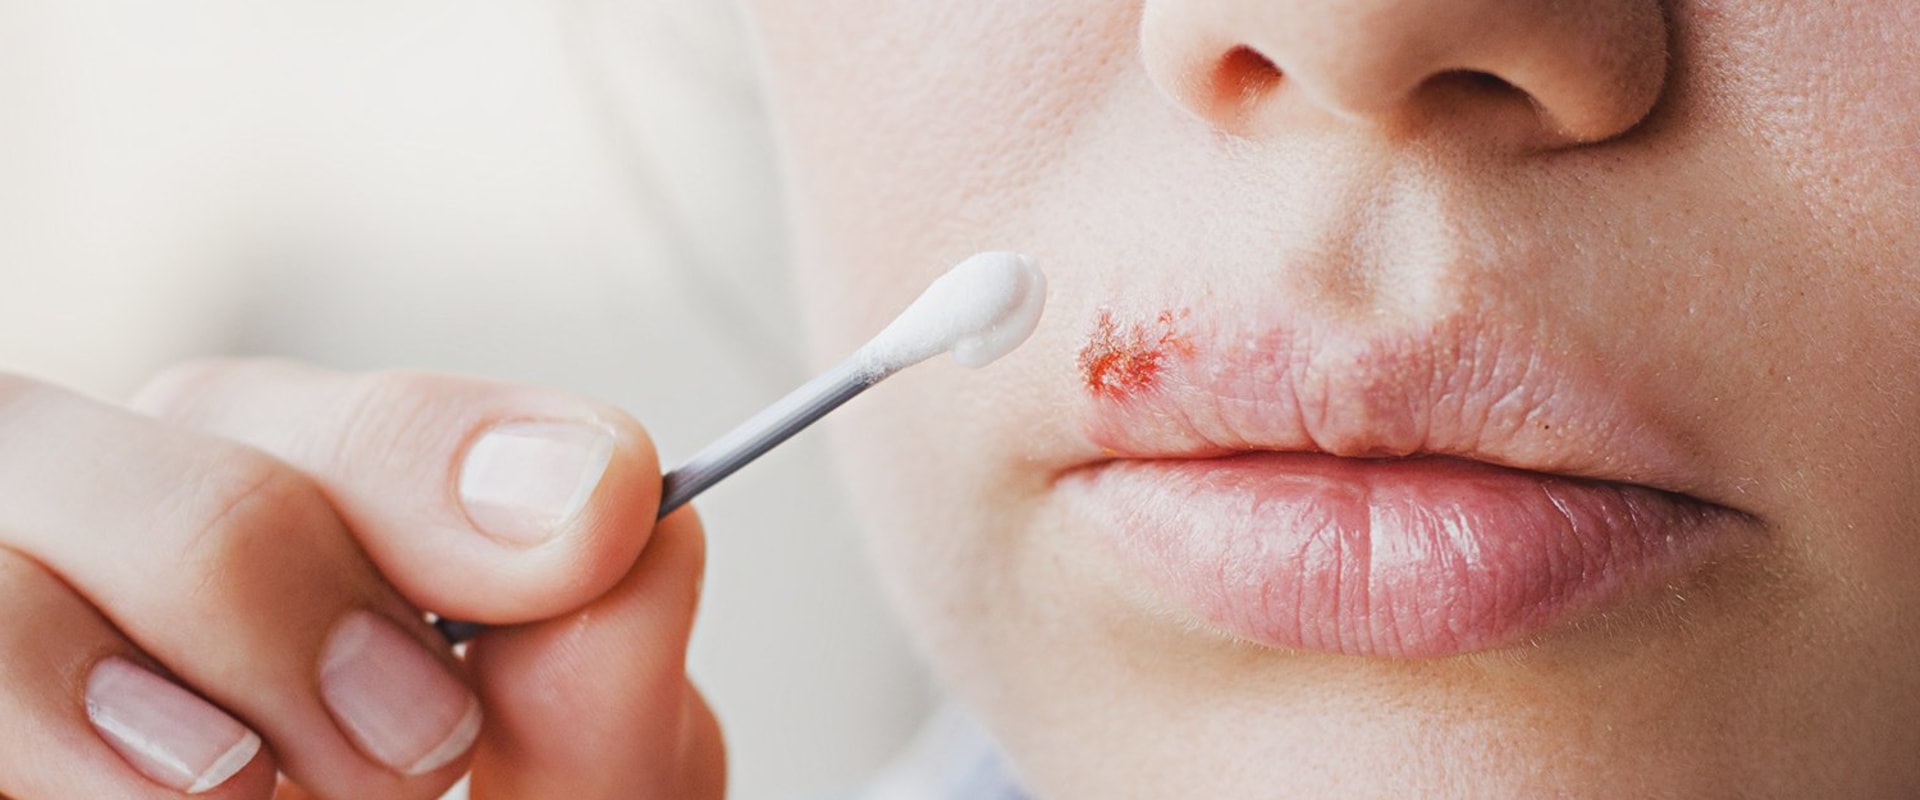 Pain Relievers: An Overview of Over-the-Counter Remedies for Herpes Lips